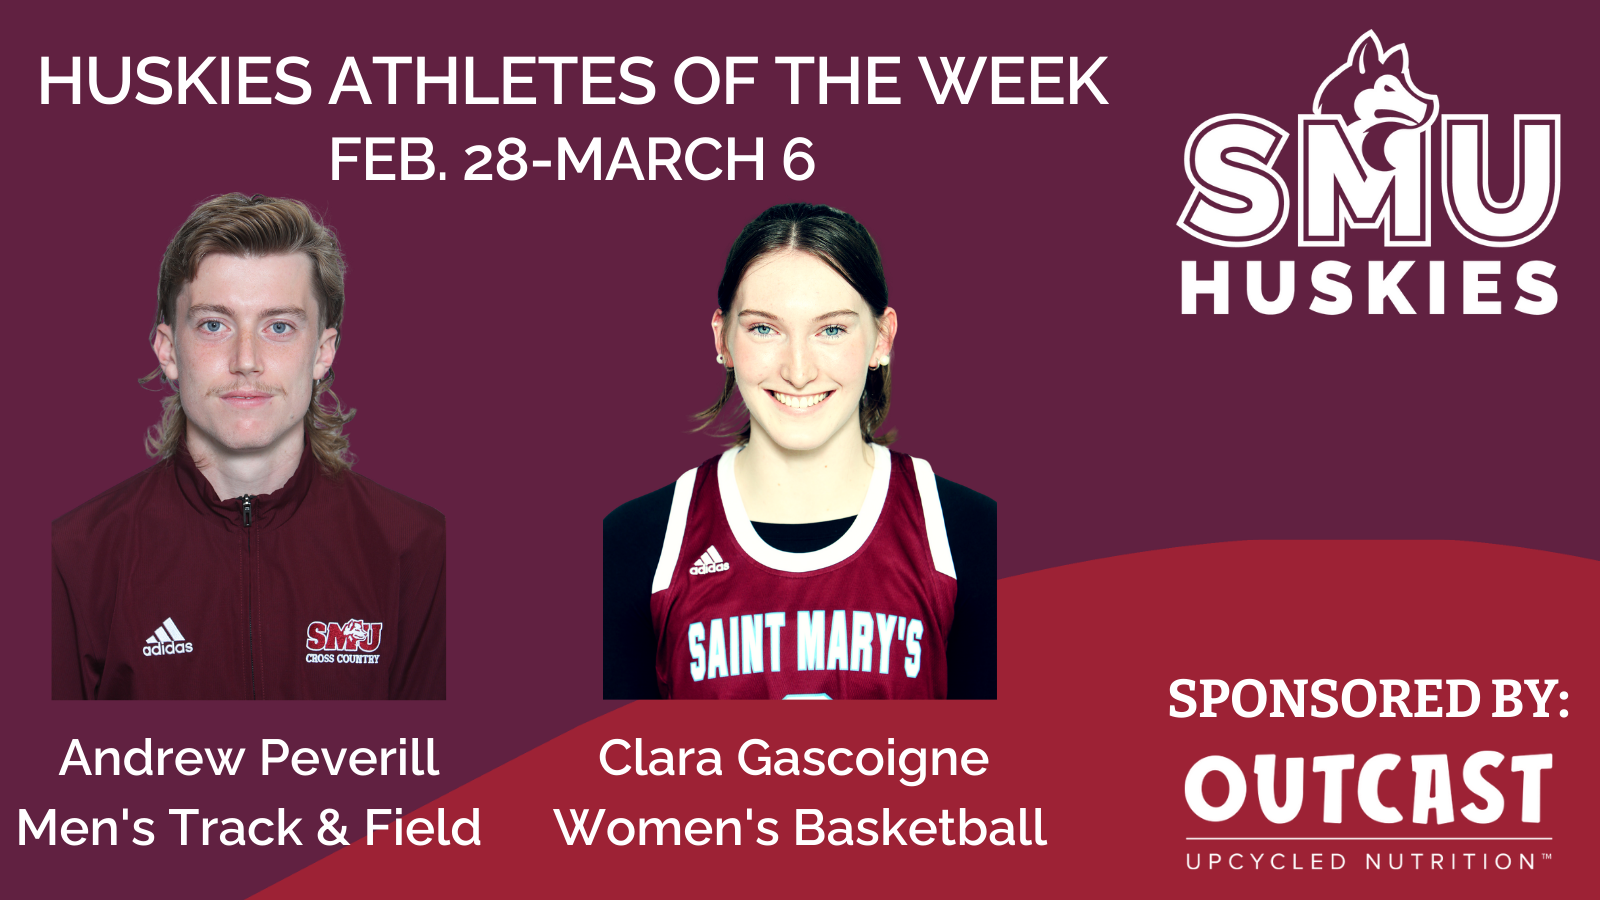 Peverill, Gascoigne named Huskies Athletes of the Week: Feb. 28-March 6